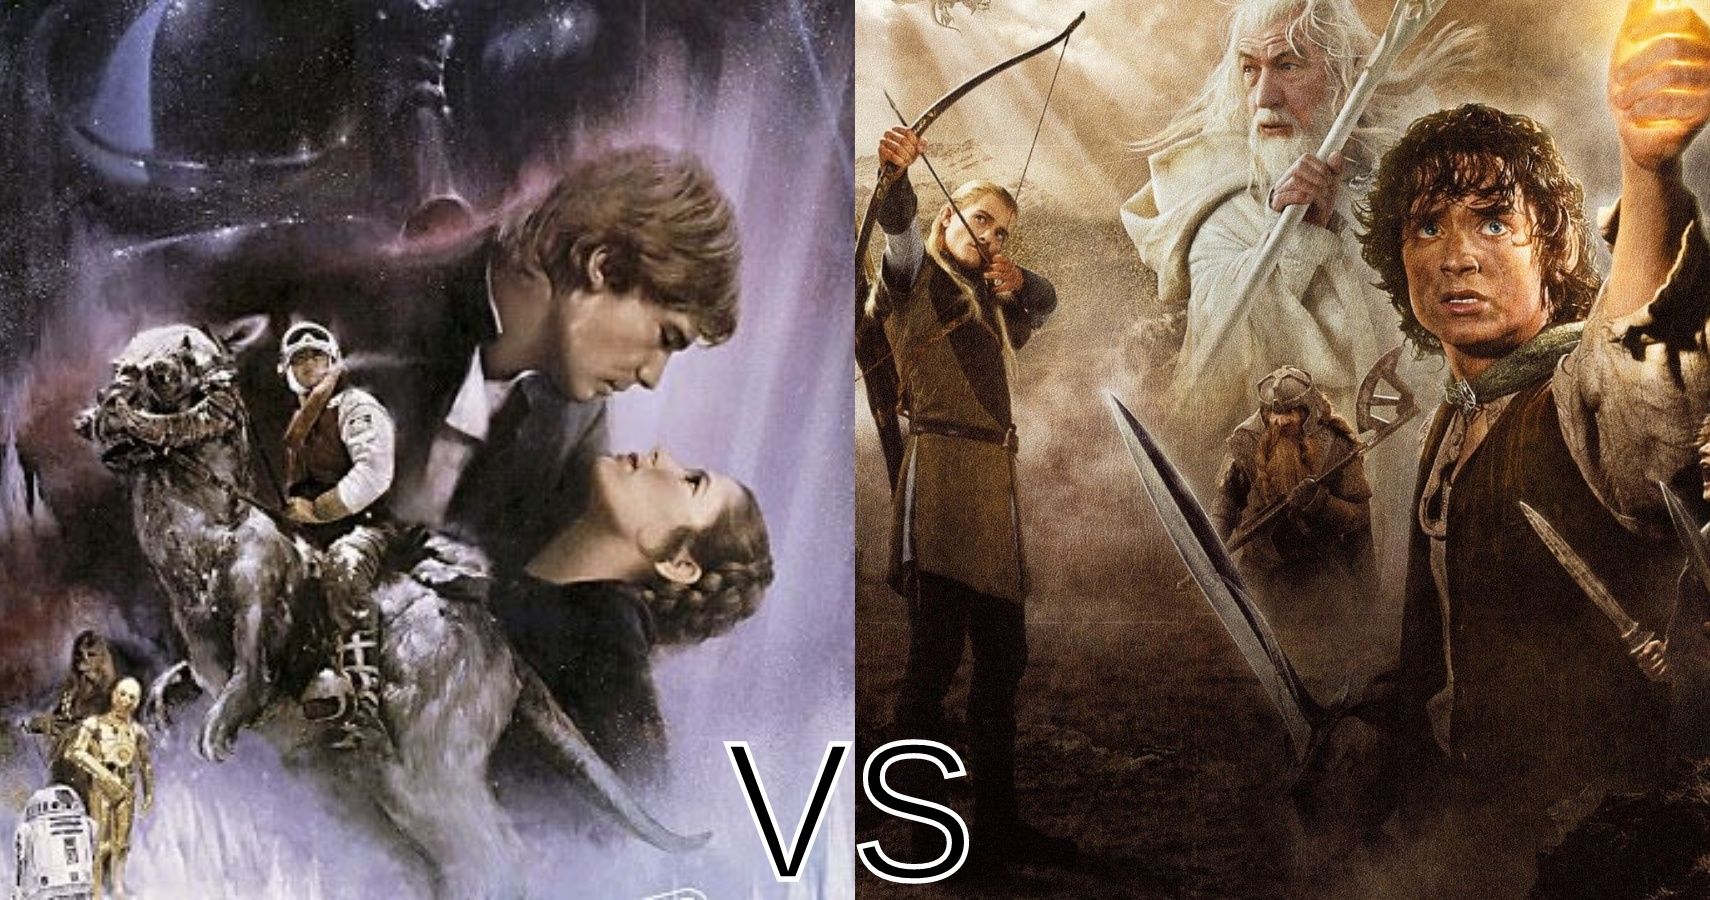 Star Wars Vs Lord Of The Rings 10 Best Movies According To Rotten Tomatoes Audience Score